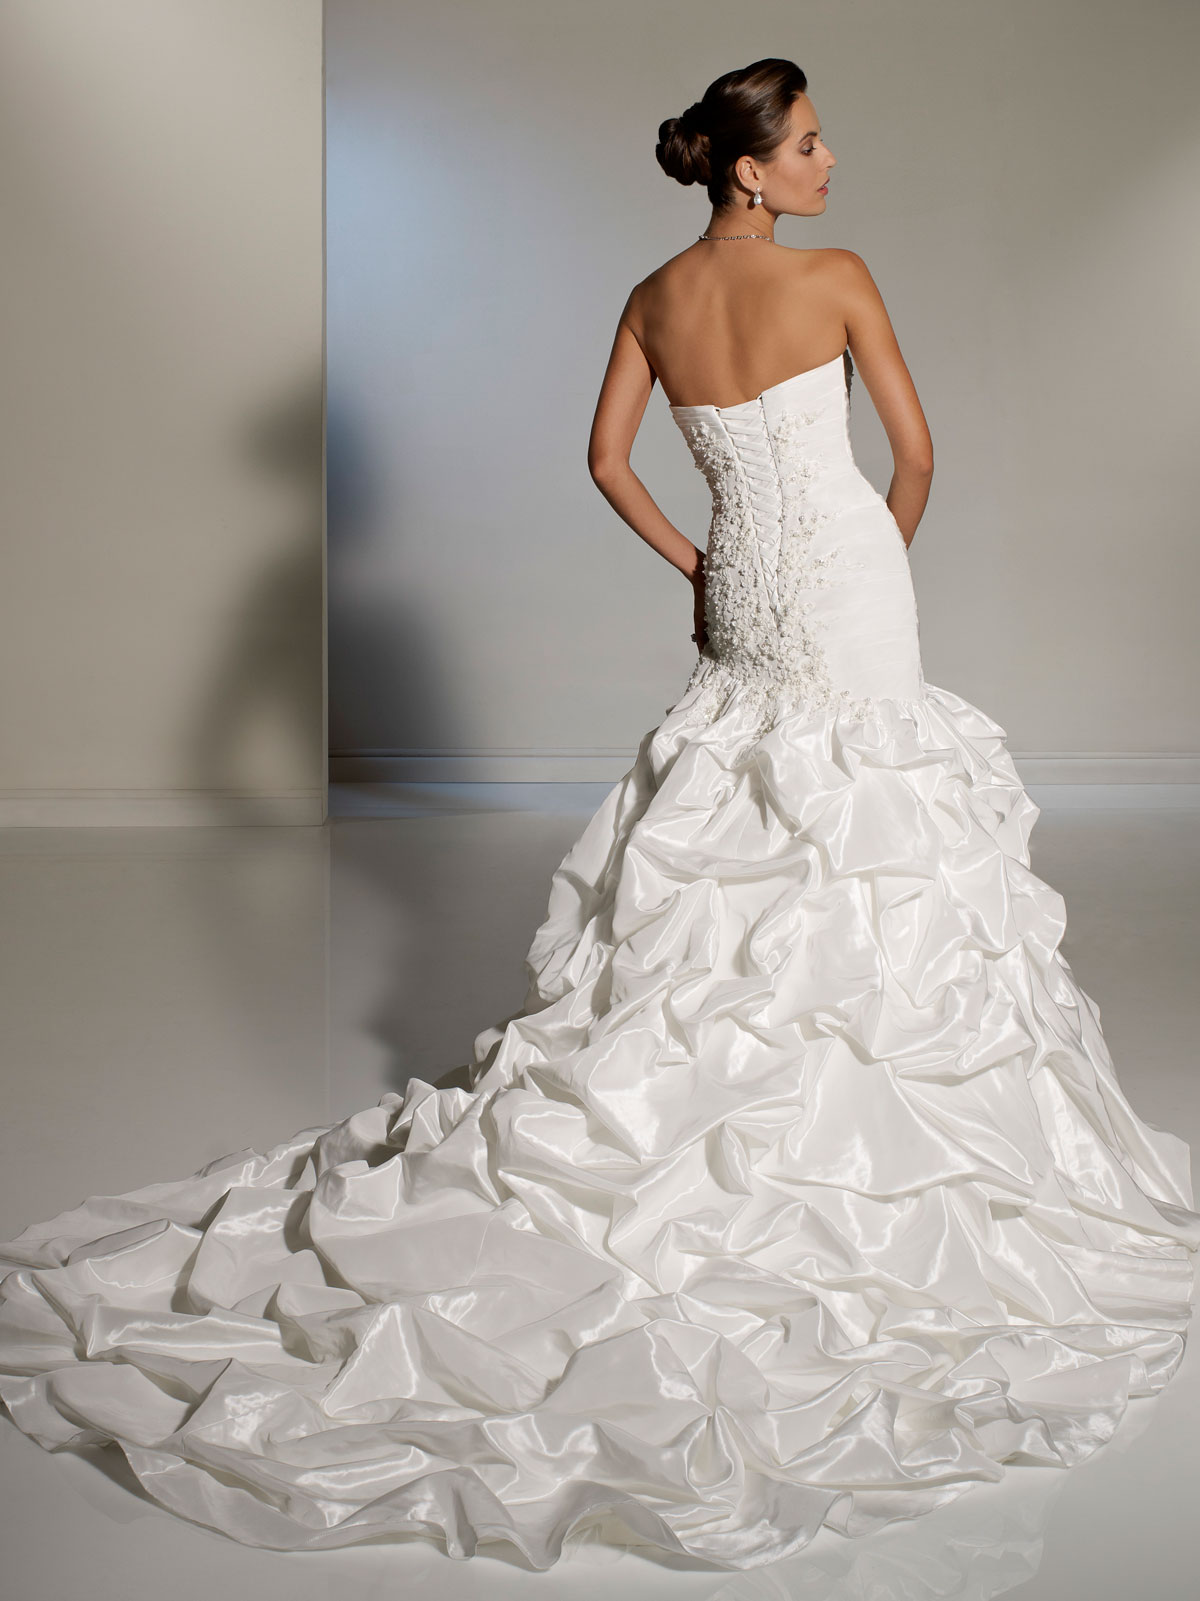 strapless wedding gown with waterfall train